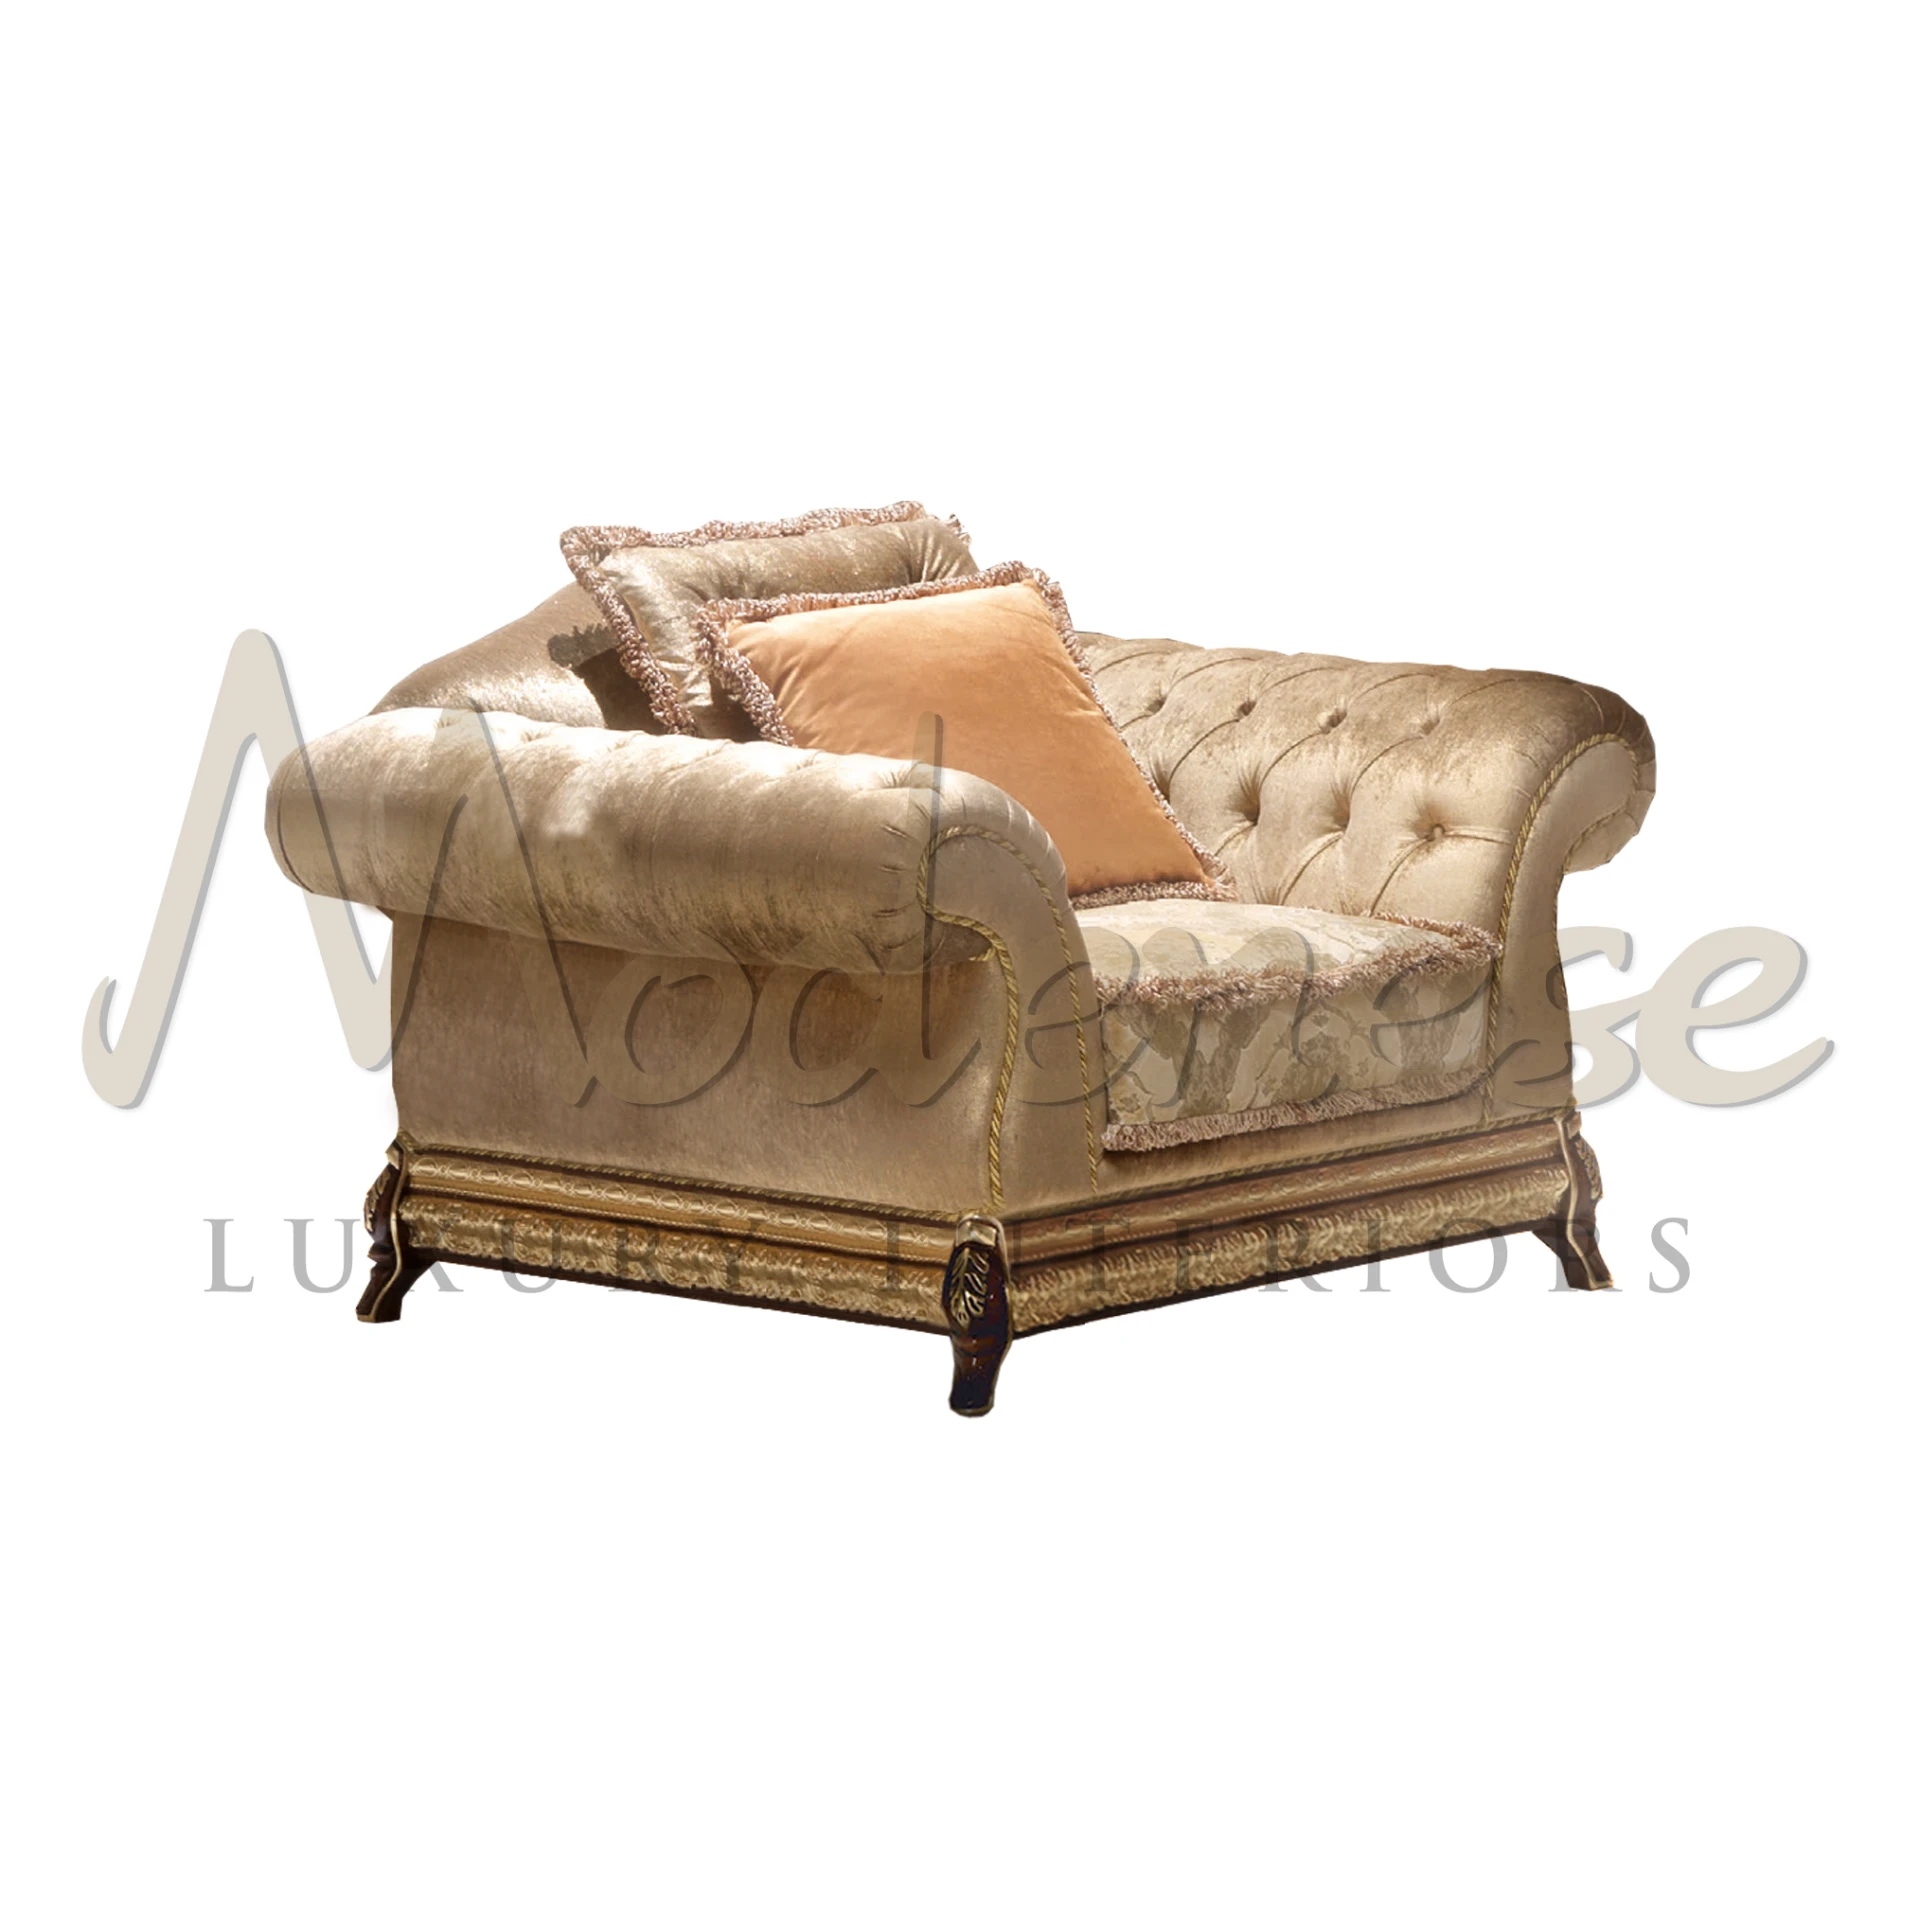 Elegant beige velvet Capitone armchair with deep button tufting and ornate golden trim detailing.